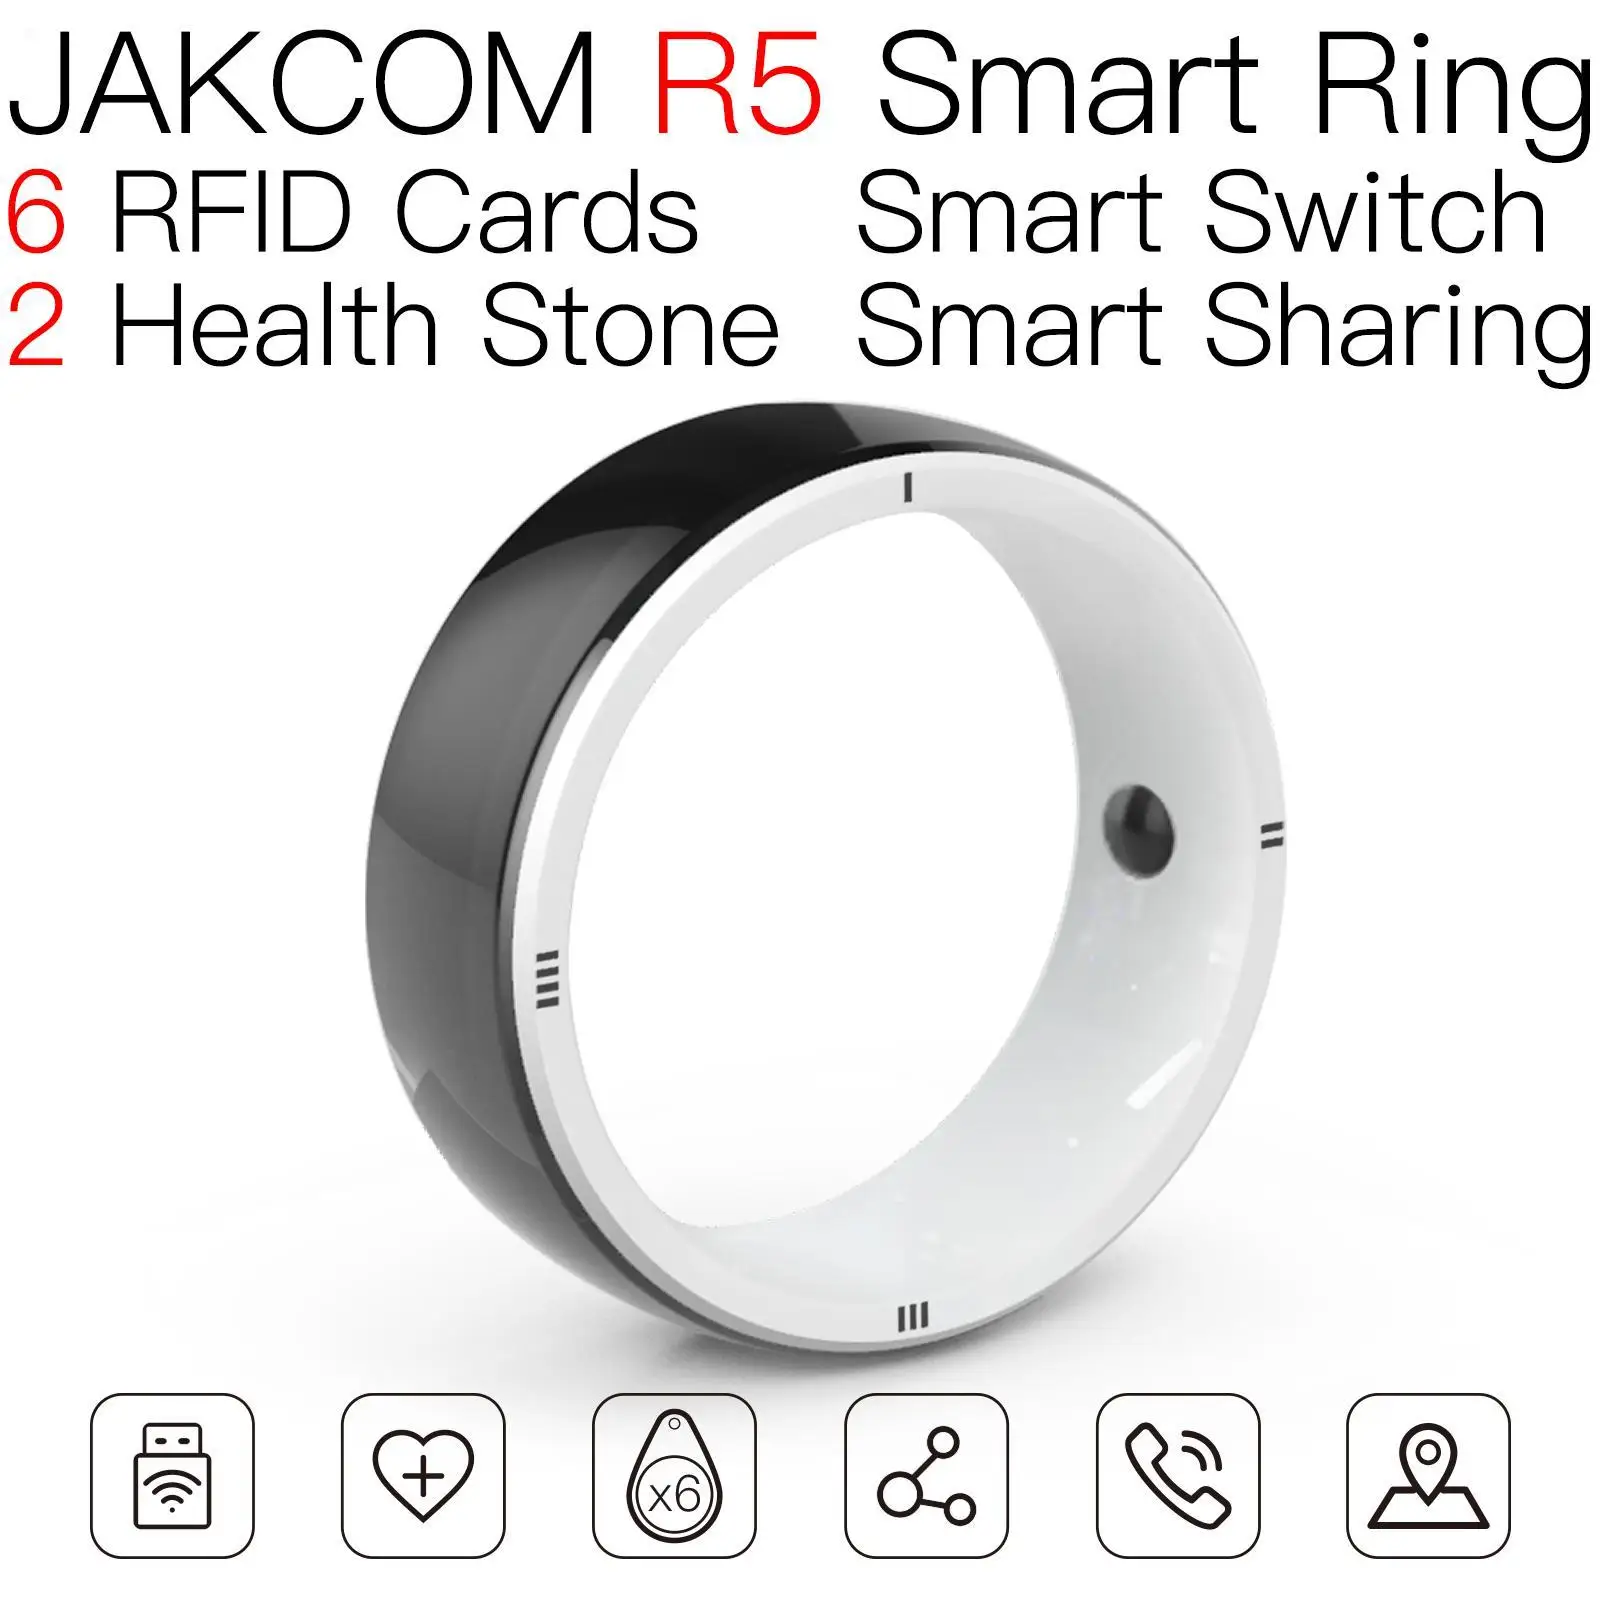 JAKCOM R5 Smart Ring better than electric smart drill android wear hbo alexa dot 3 one s1 active designer